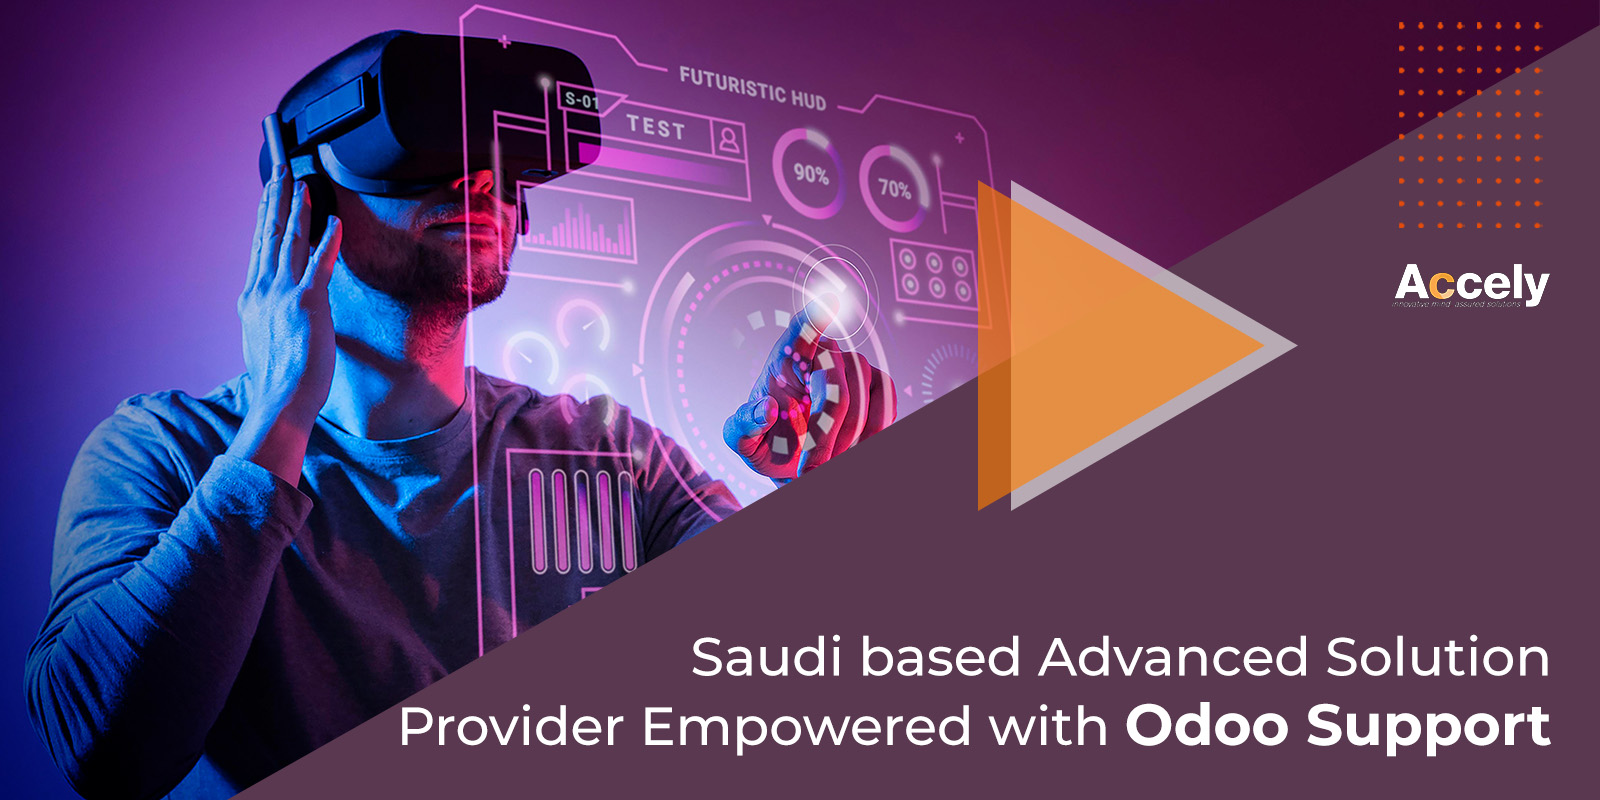 Saudi based Advanced Solution Provider Empowered with Odoo Support and Enhancement